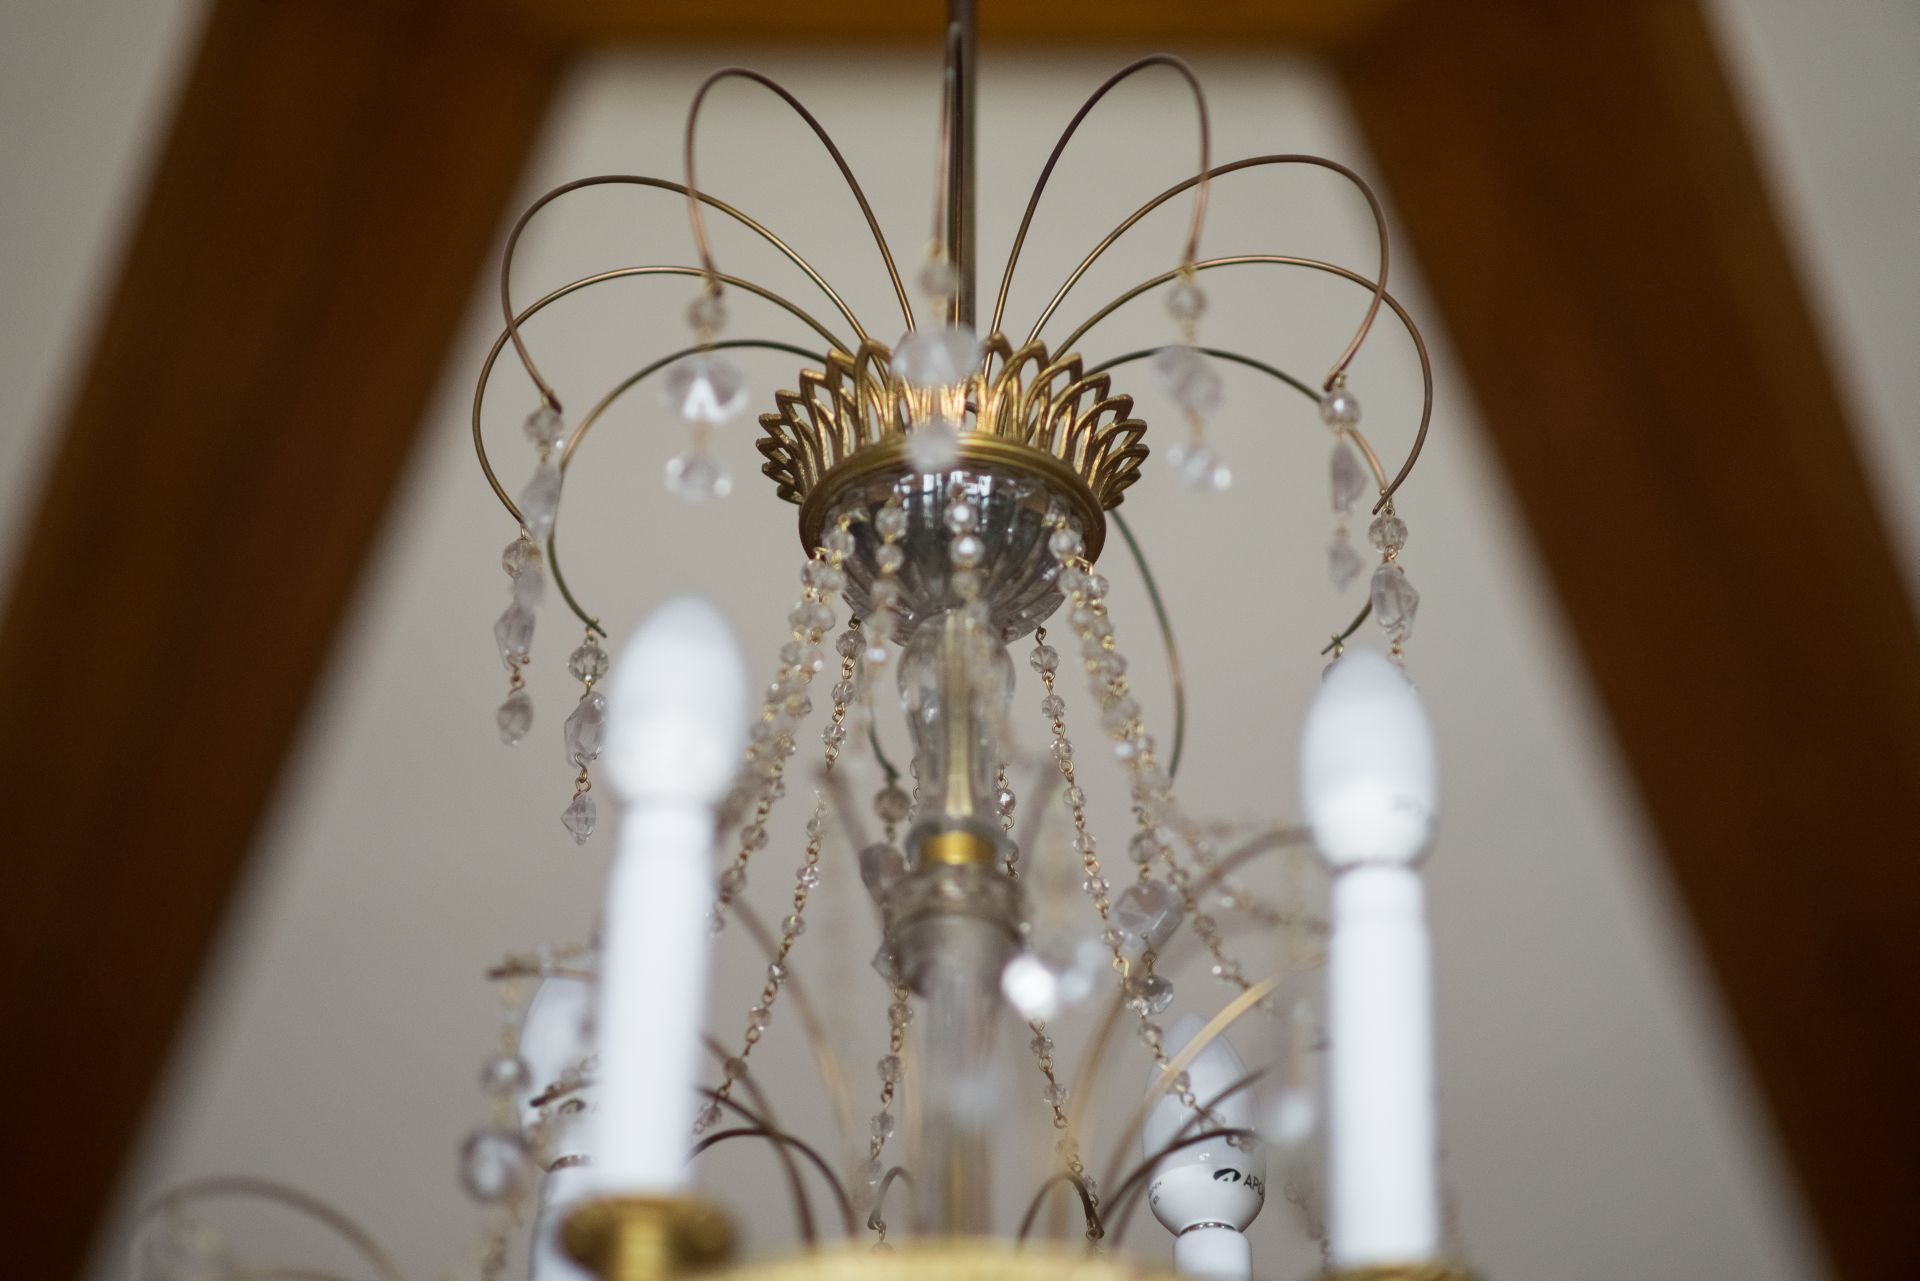 Fragment of chandelier, 1900–1929, Archdiocese of Vilnius. Photo by Povilas Jarmala, 2017